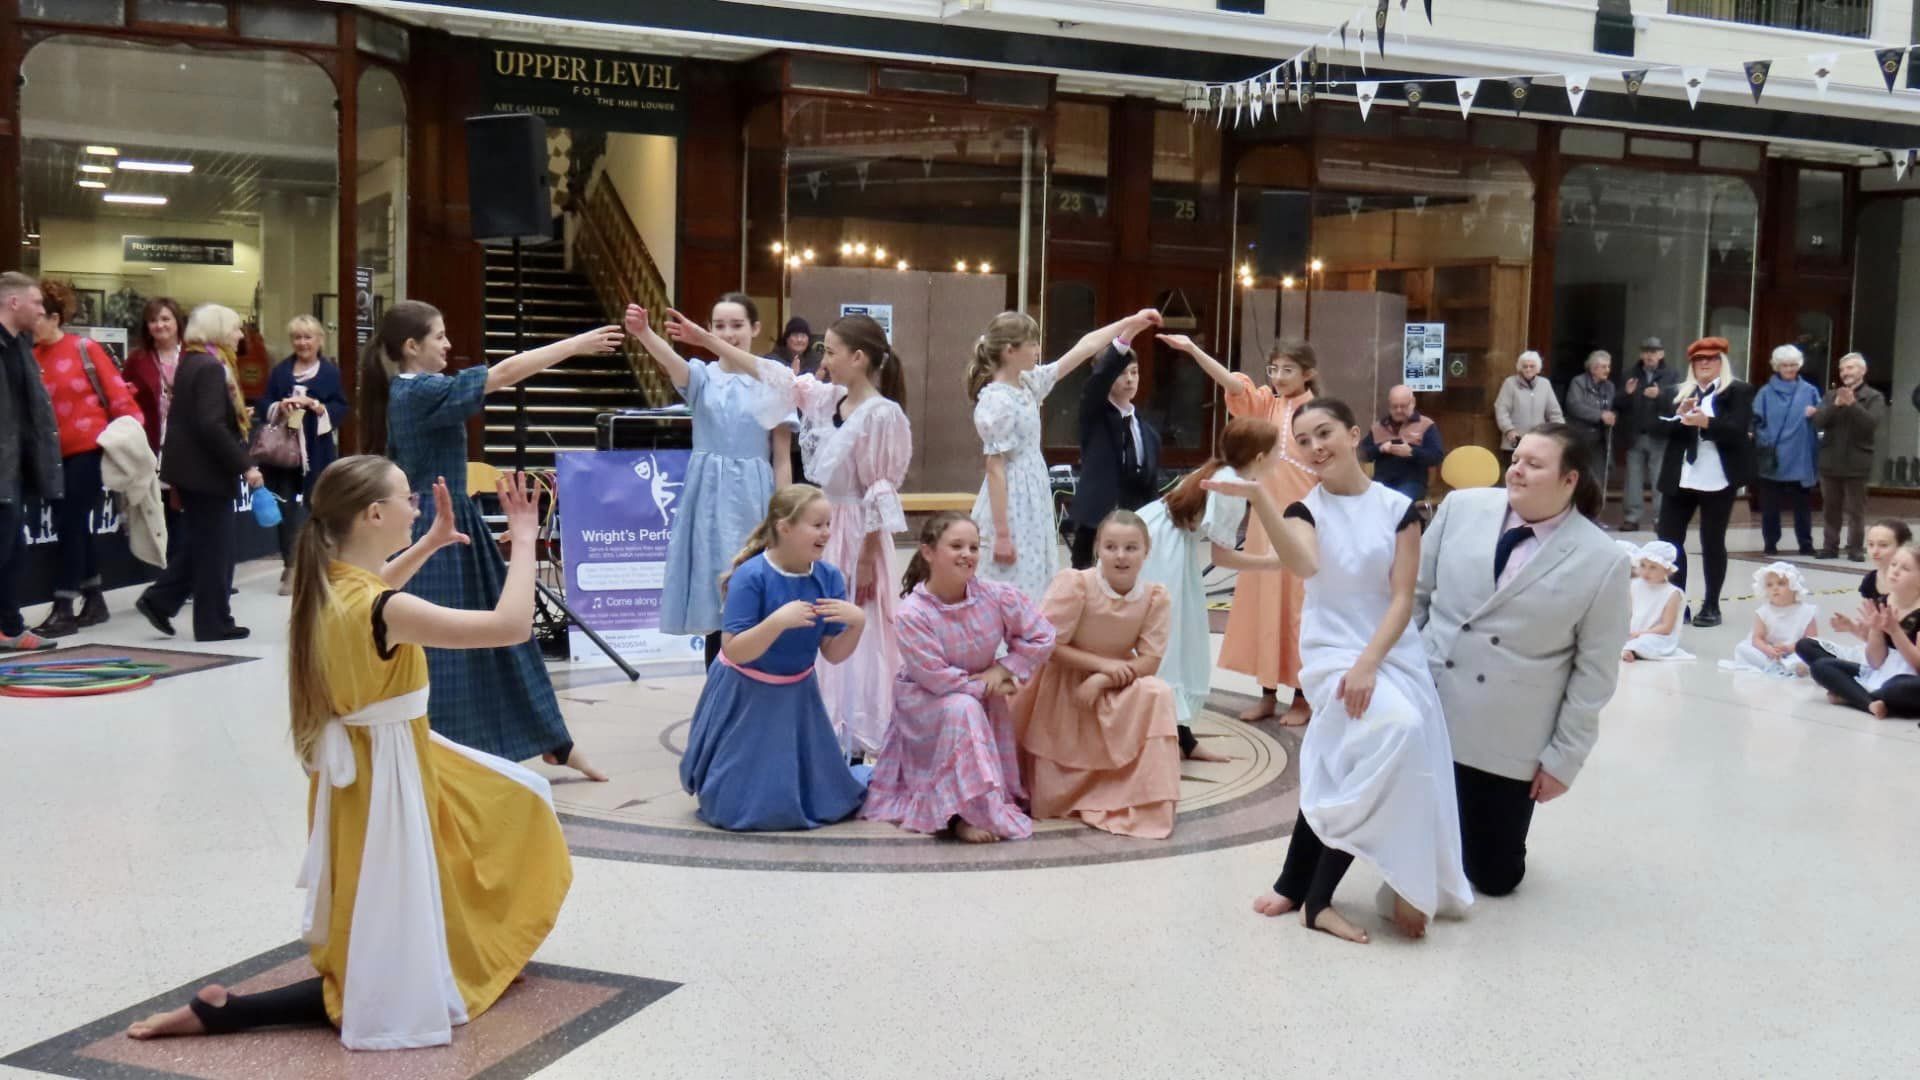 The historic Wayfarers Arcade in Southport has marked its 125th anniversary with a weekend of Victorian celebrations with entertainment from the Gambolling Arena Theatre Company and Wrights Performing Arts. Photo by Andrew Brown Stand Up For Southport